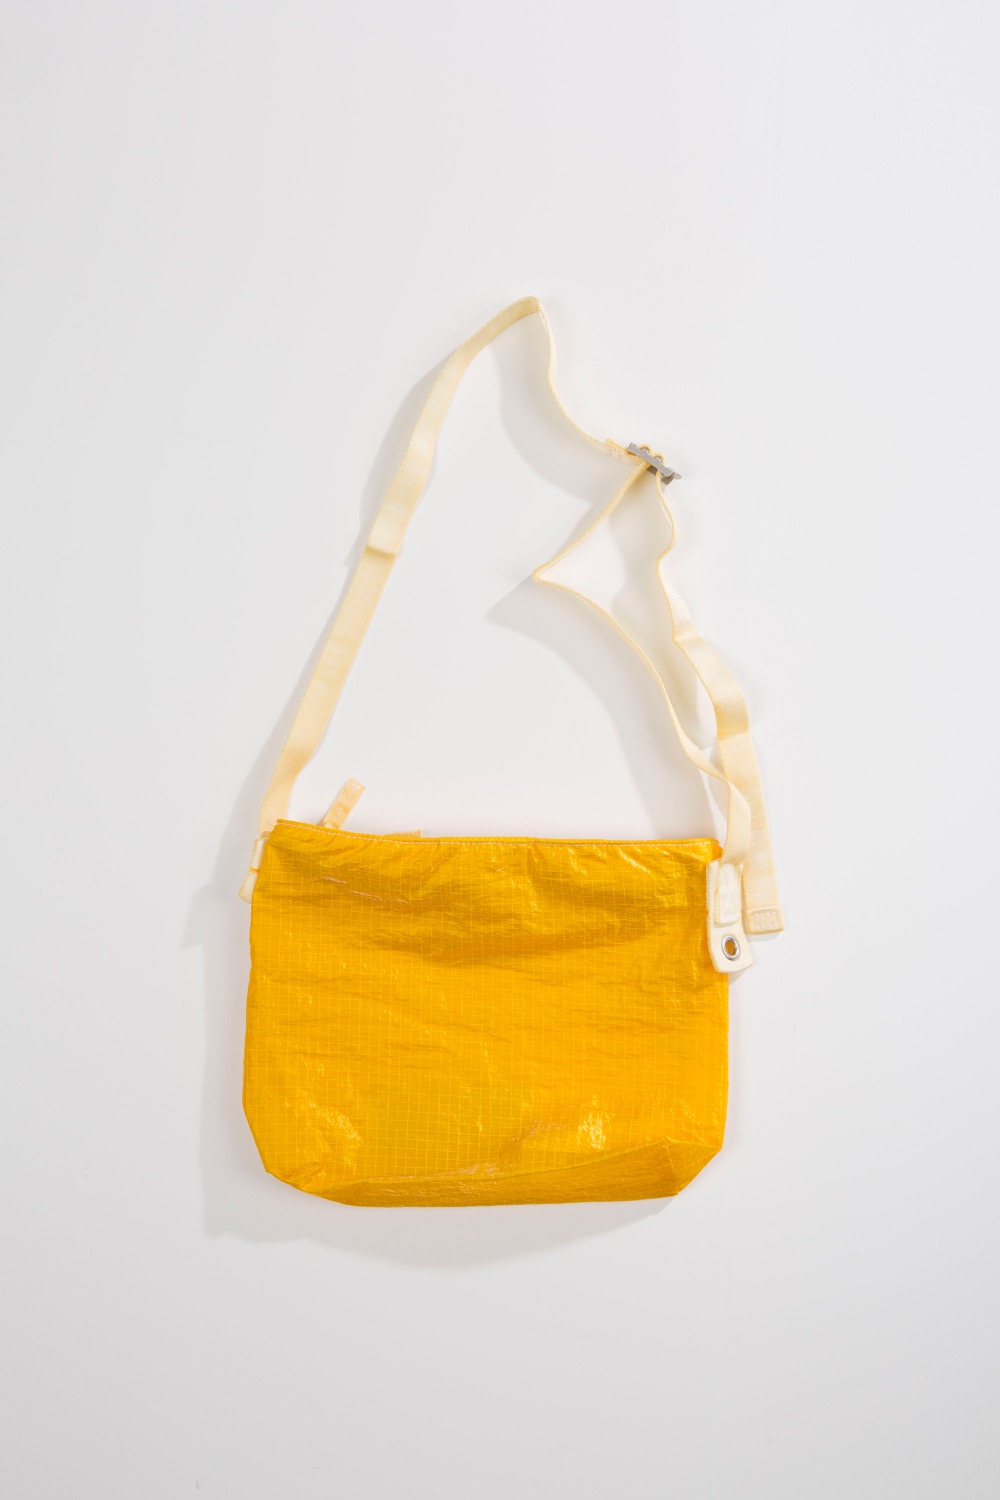 (23FW) TQ-RB-CBS/SHOULDER BAG - OVER DYED CROSS BODY BAG SMALL YELLOW